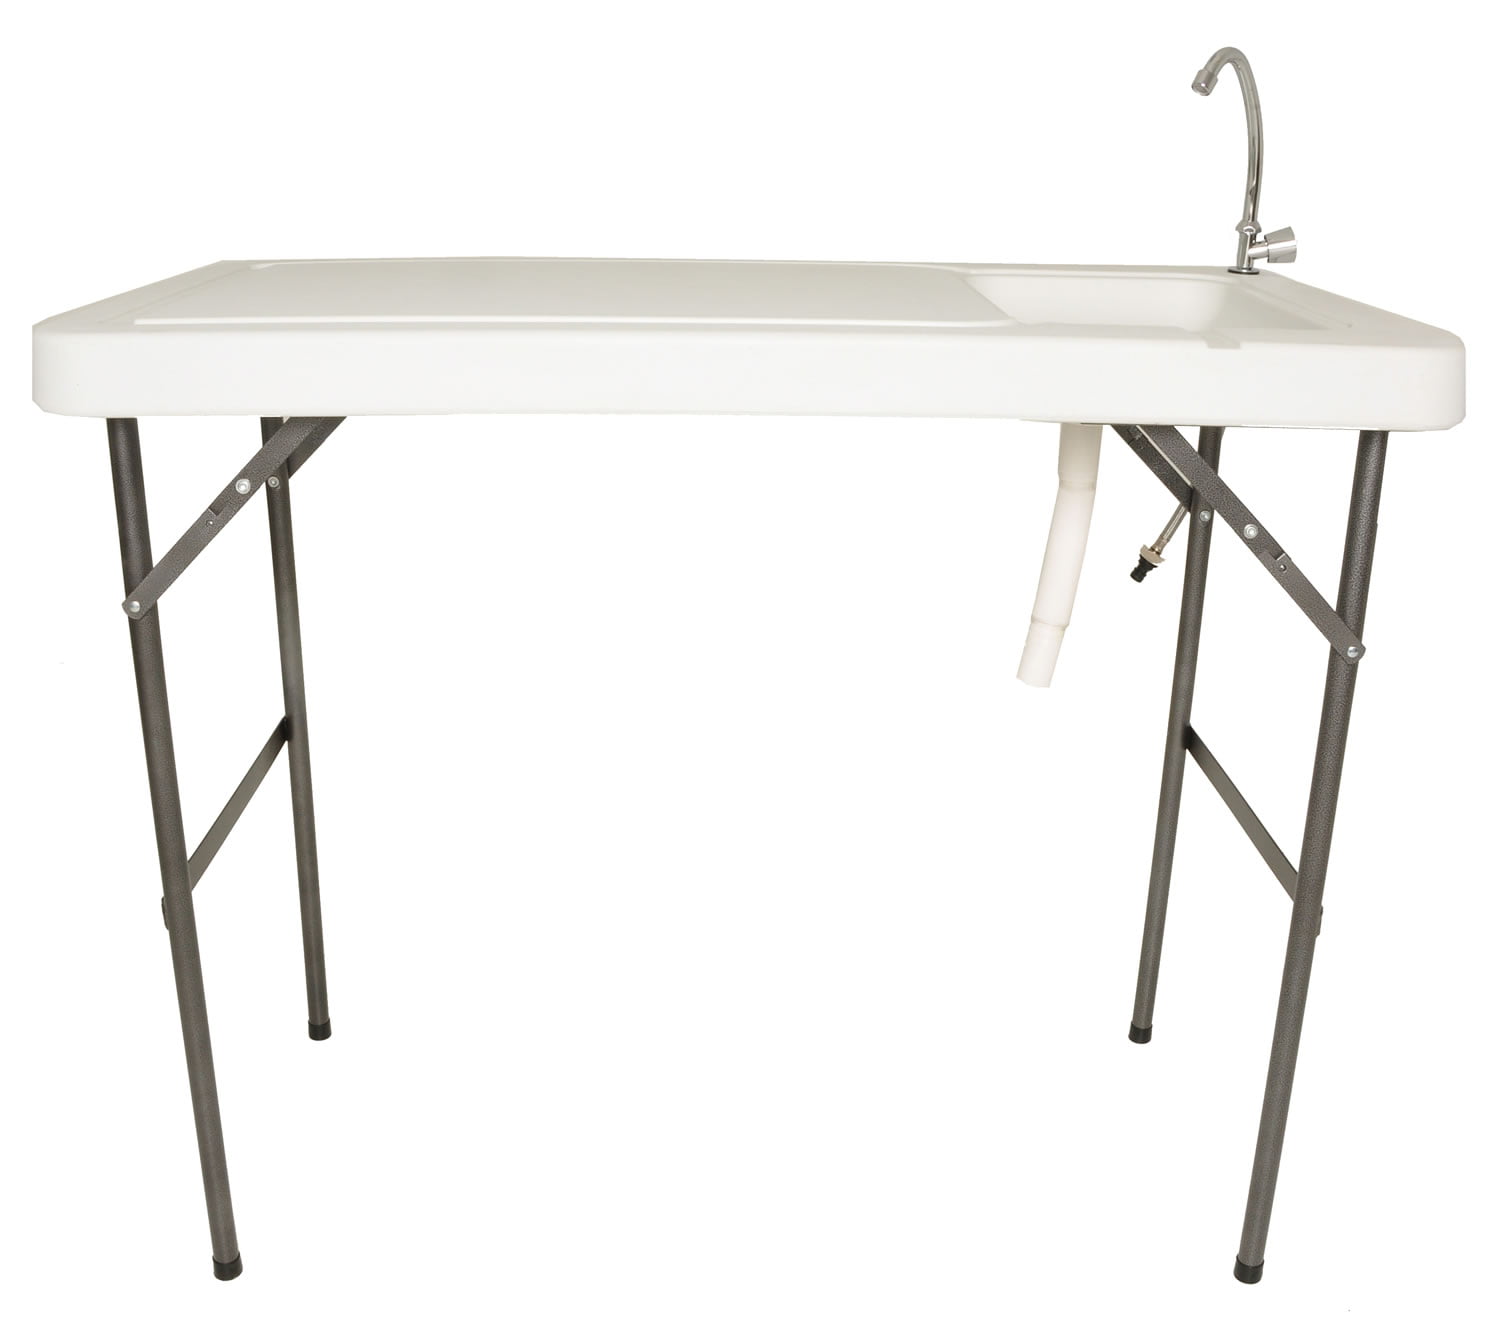 High Desert Multipurpose Folding Fish & Game Cleaning Utility Table with Faucet 